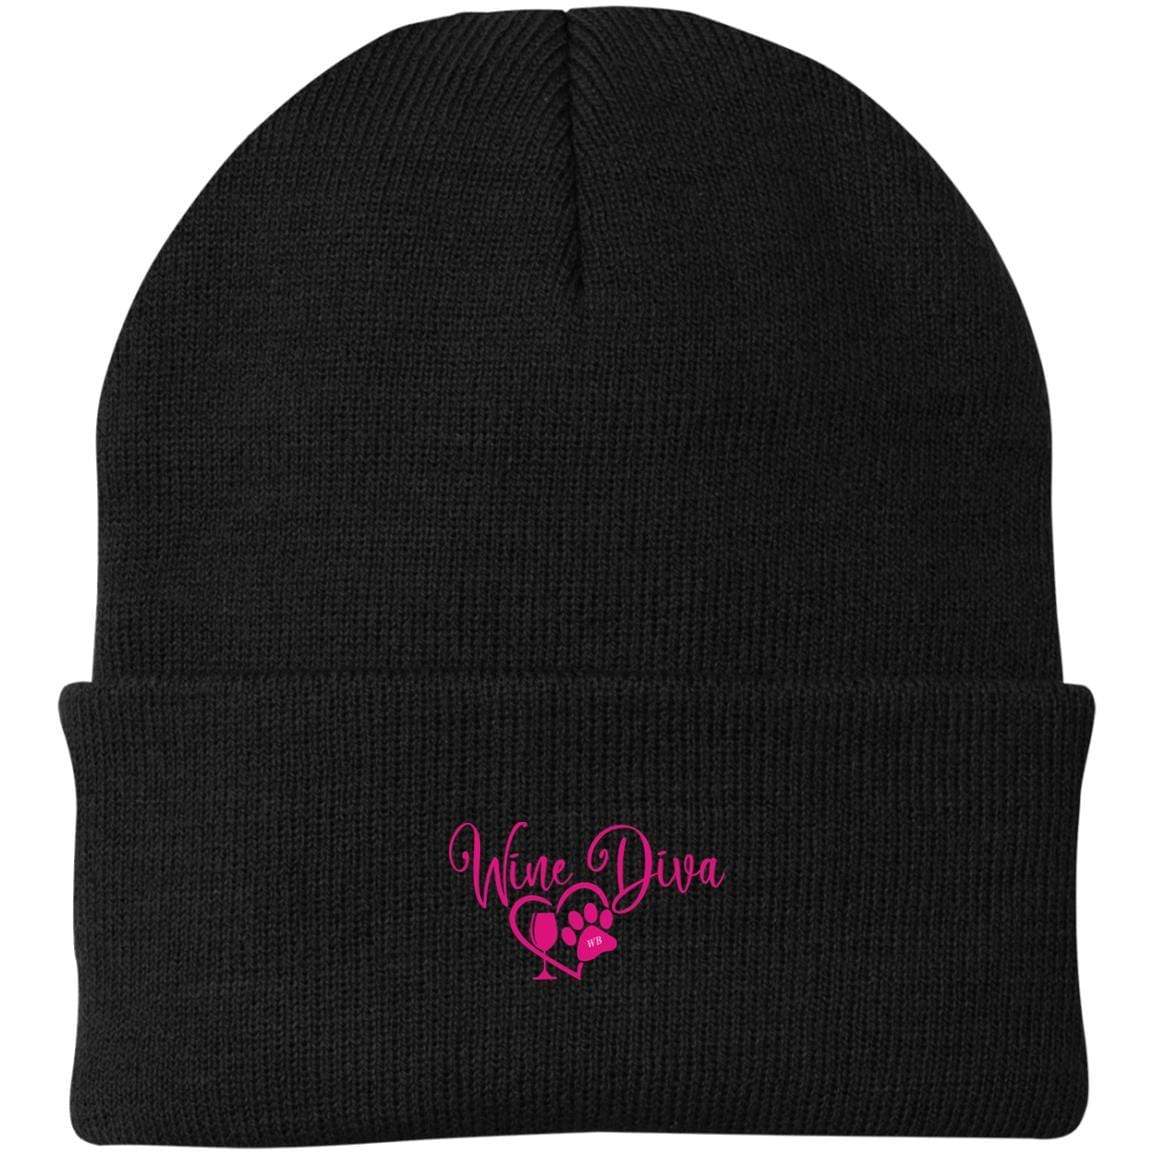 Hats Black / One Size Winey Bitches Co "Wine Diva" Embroidered Knit Cap WineyBitchesCo